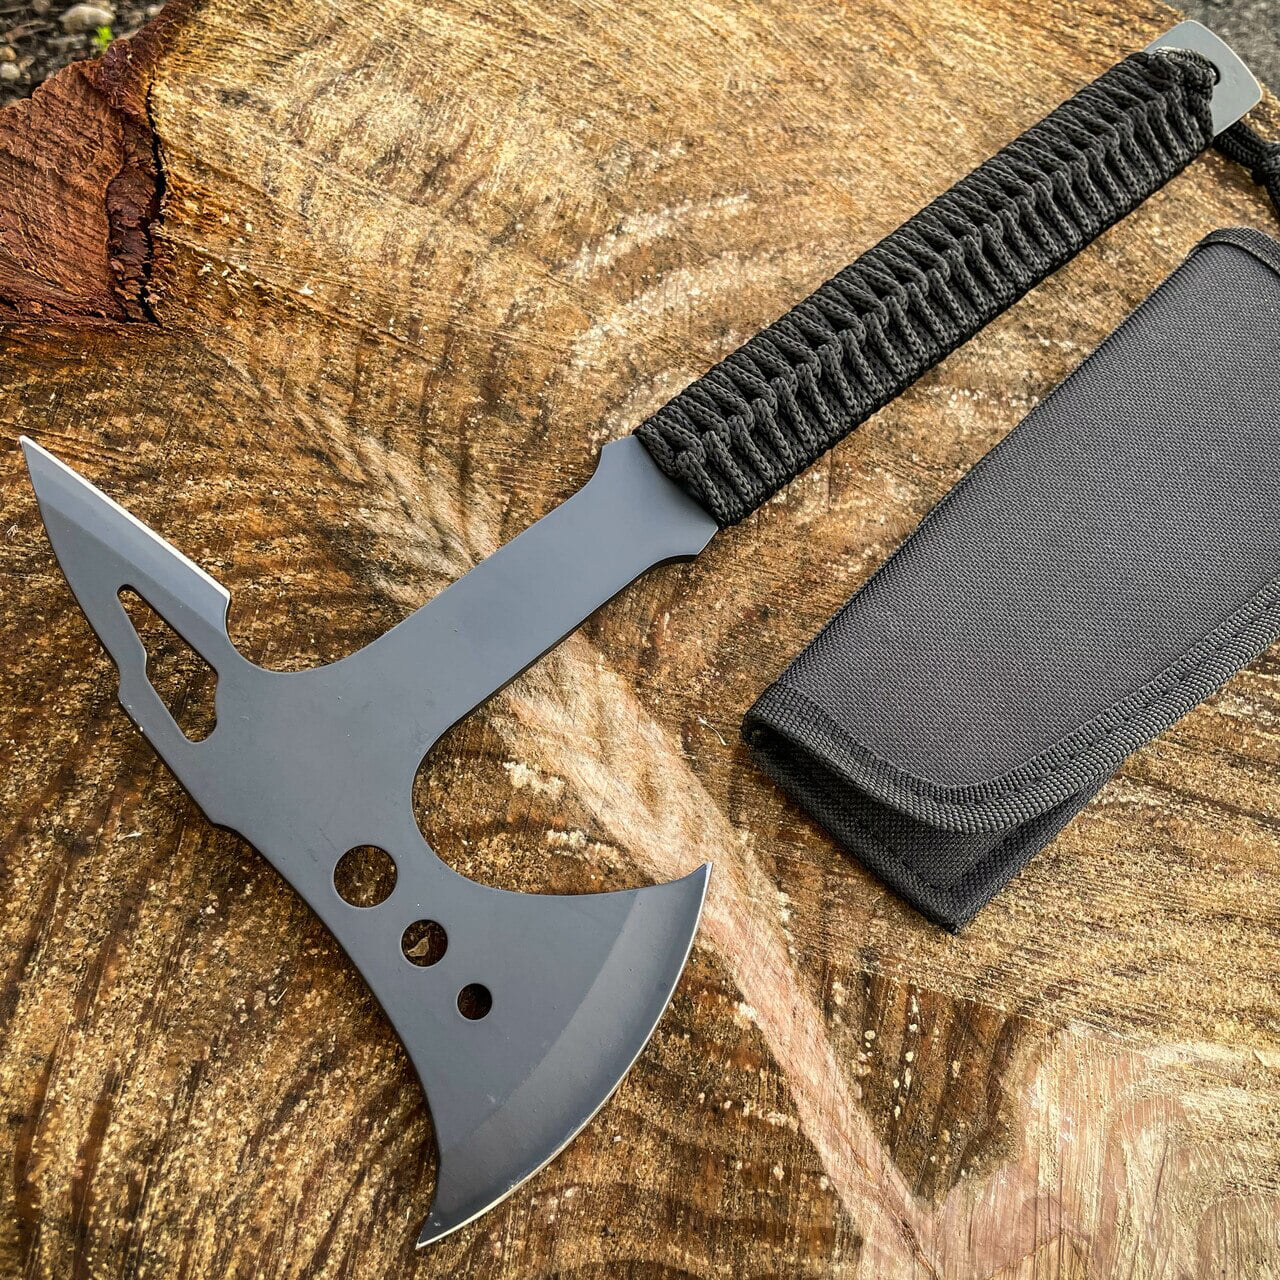 Details about   Tactical Survival Axe Kit Camping Tomahawk Hatchet Emergency Gear Hunting Set 